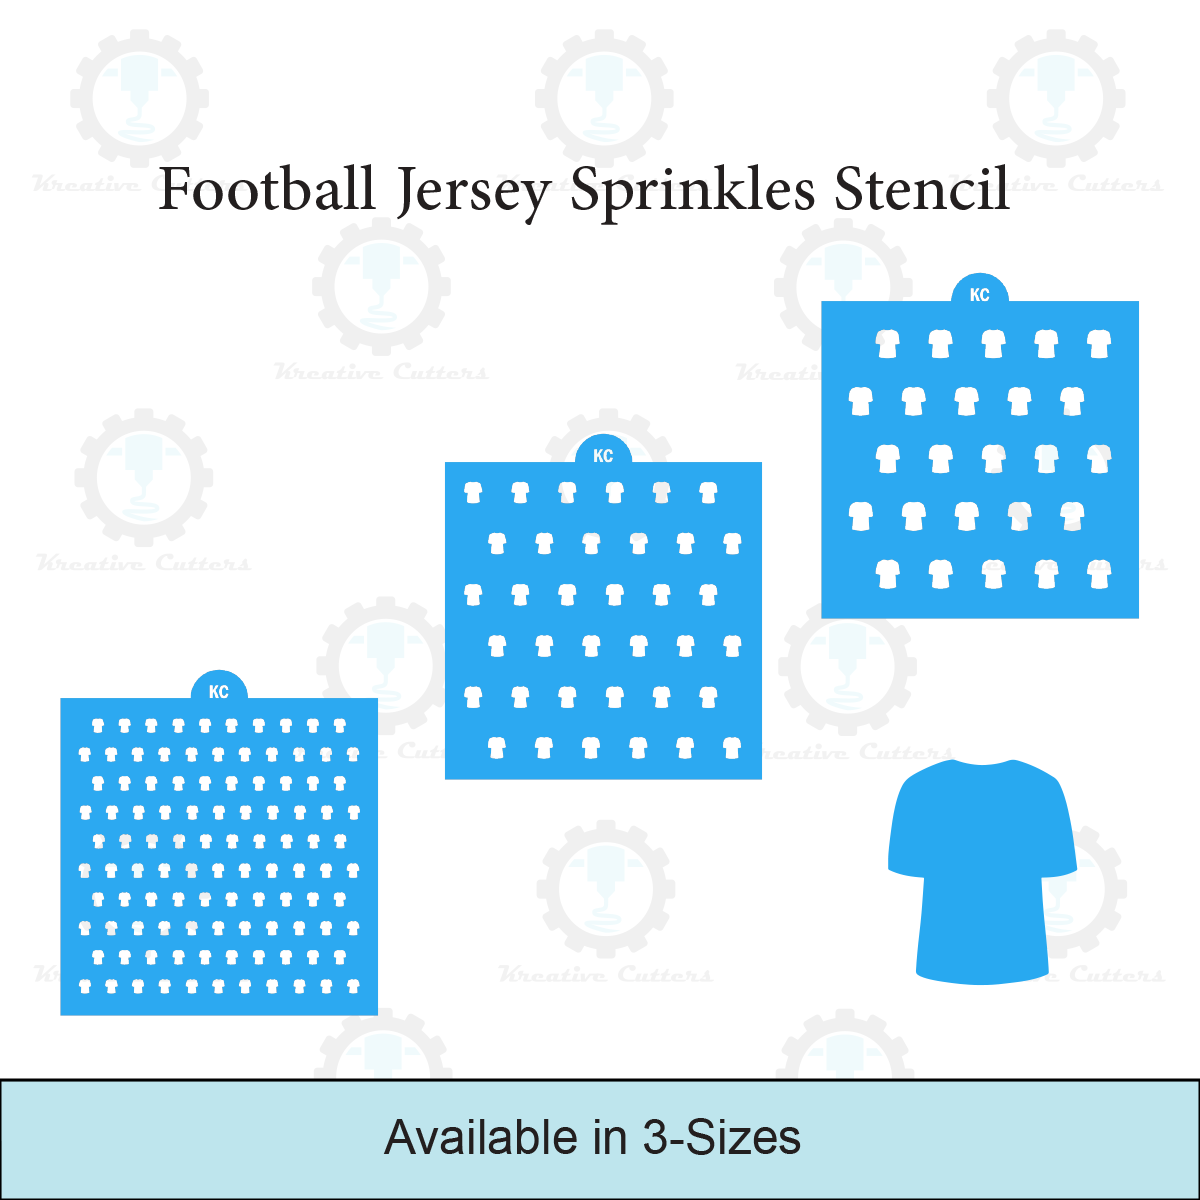 Football Jersey Sprinkles Stencil | 3D Printed, Cookie, Cake, & Cupcake, Decorating Stencils